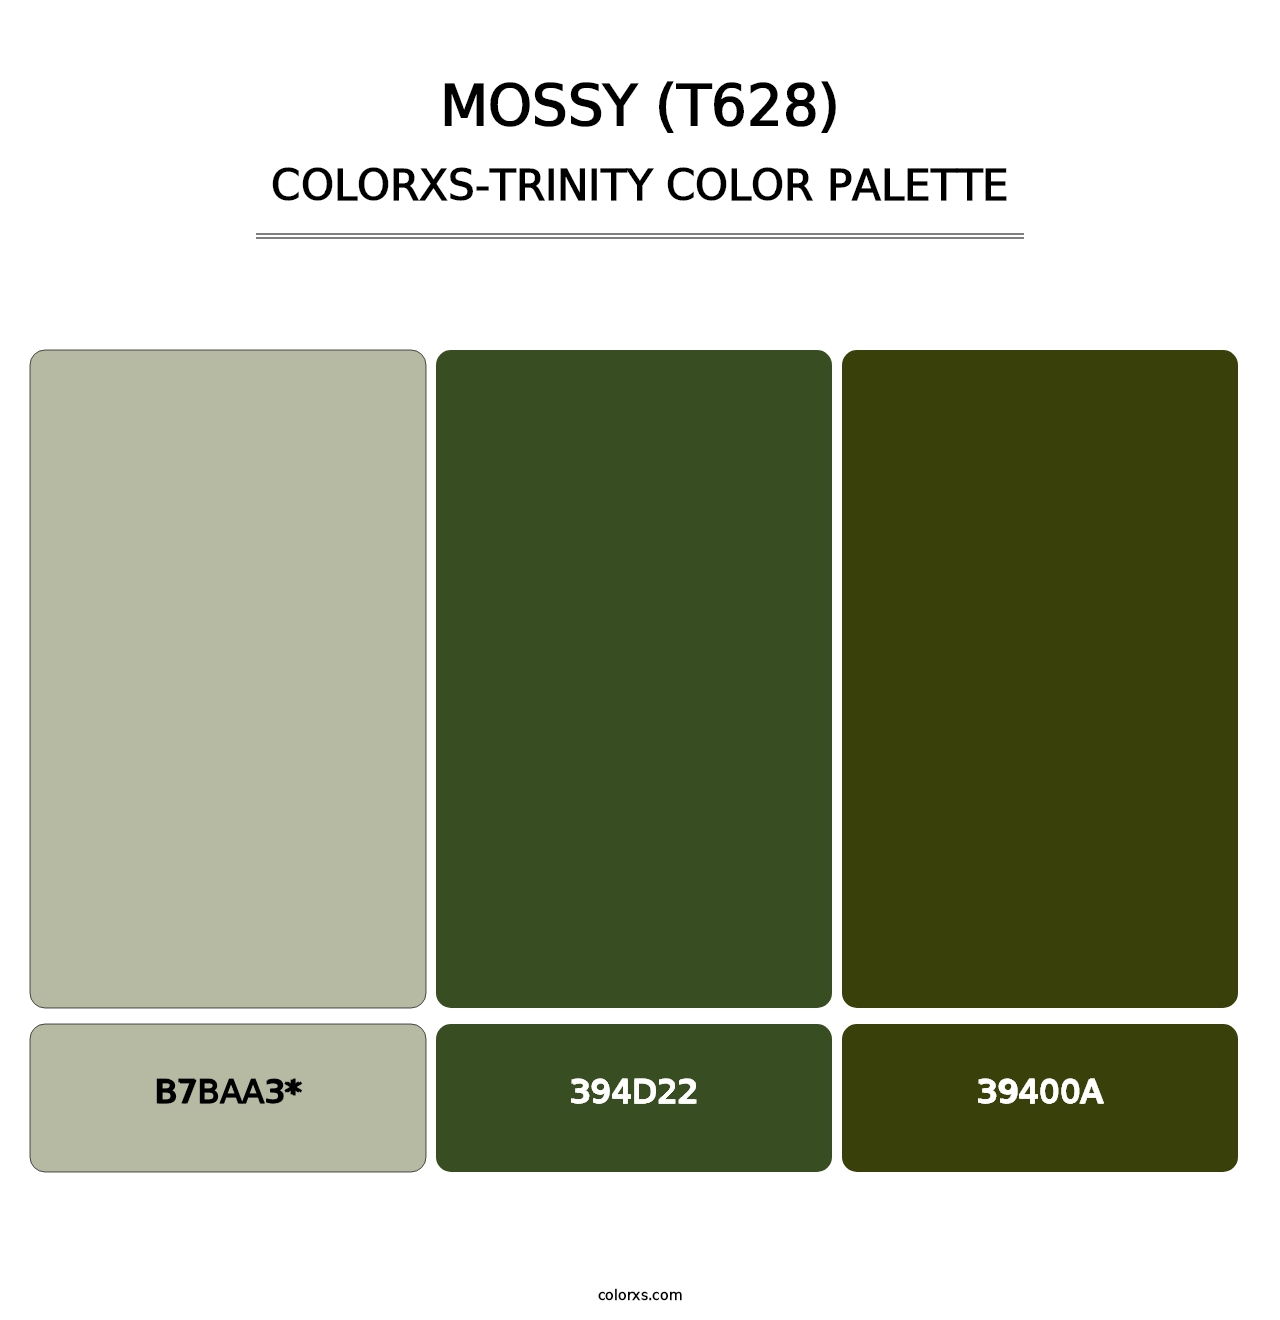 Mossy (T628) - Colorxs Trinity Palette